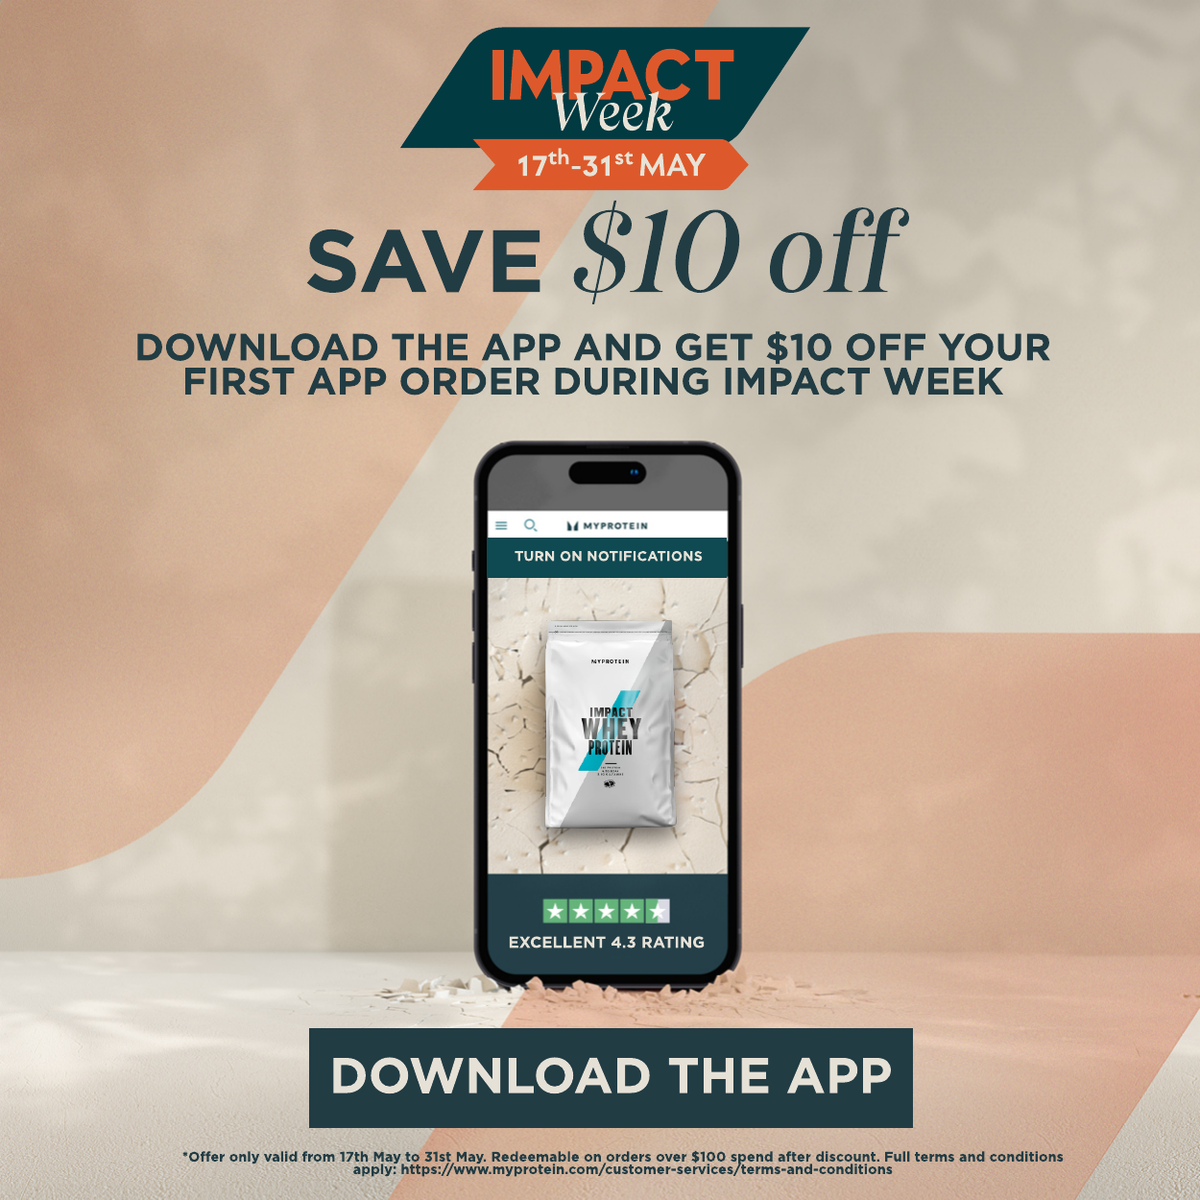 Save $10 off your first app order! Download the app and get $10 off when you spend $100 on your first app order. Offer ends 31st May